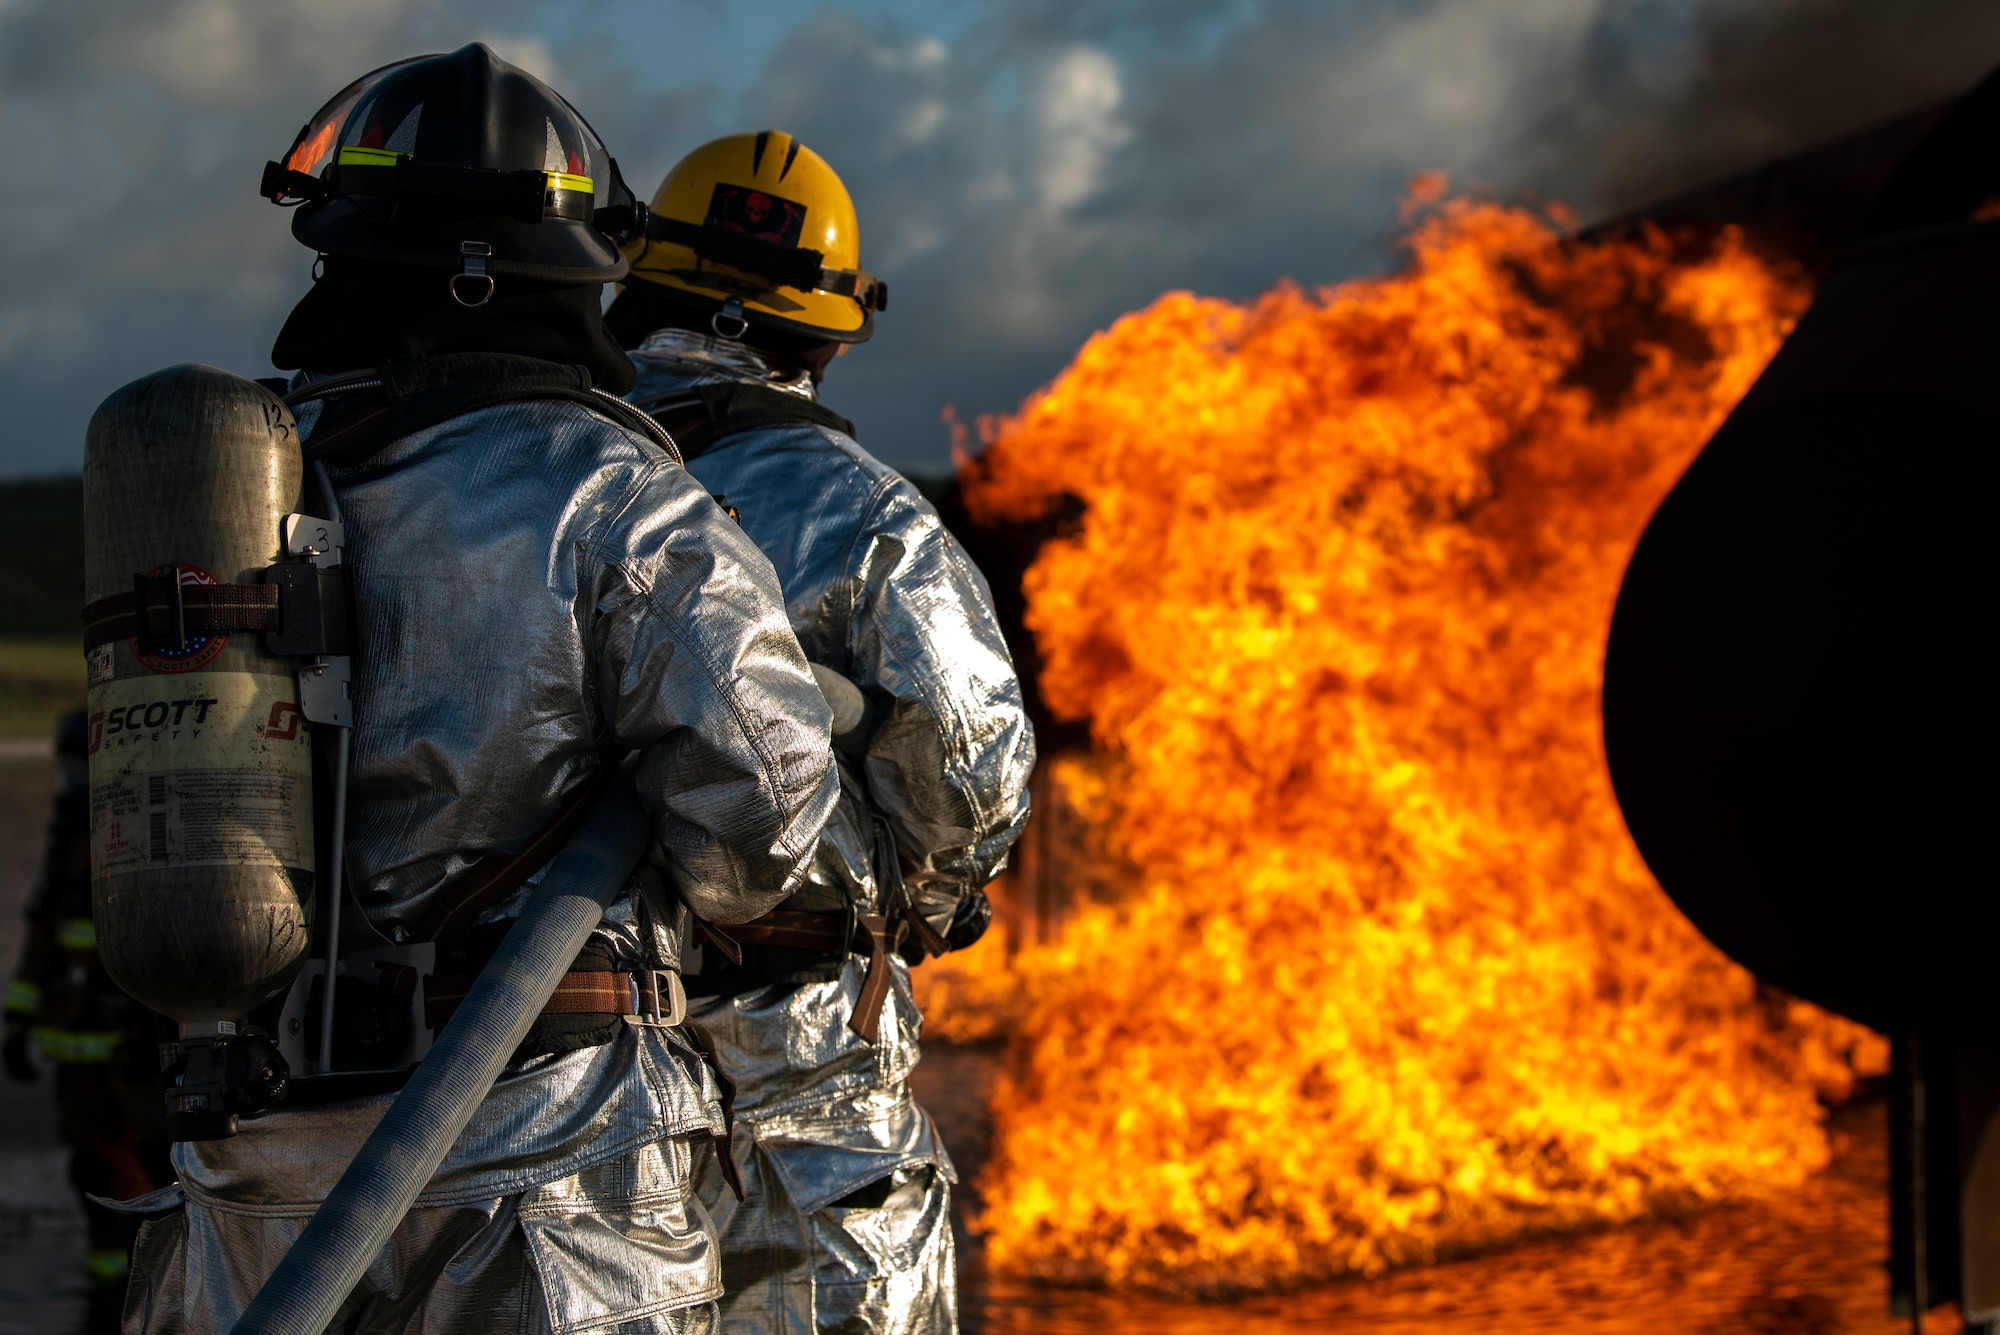 Palau firefighters put out a simulated aircraft fire during joint aircraft fire training at Andersen Air Force Base, Guam, May 11, 2021.